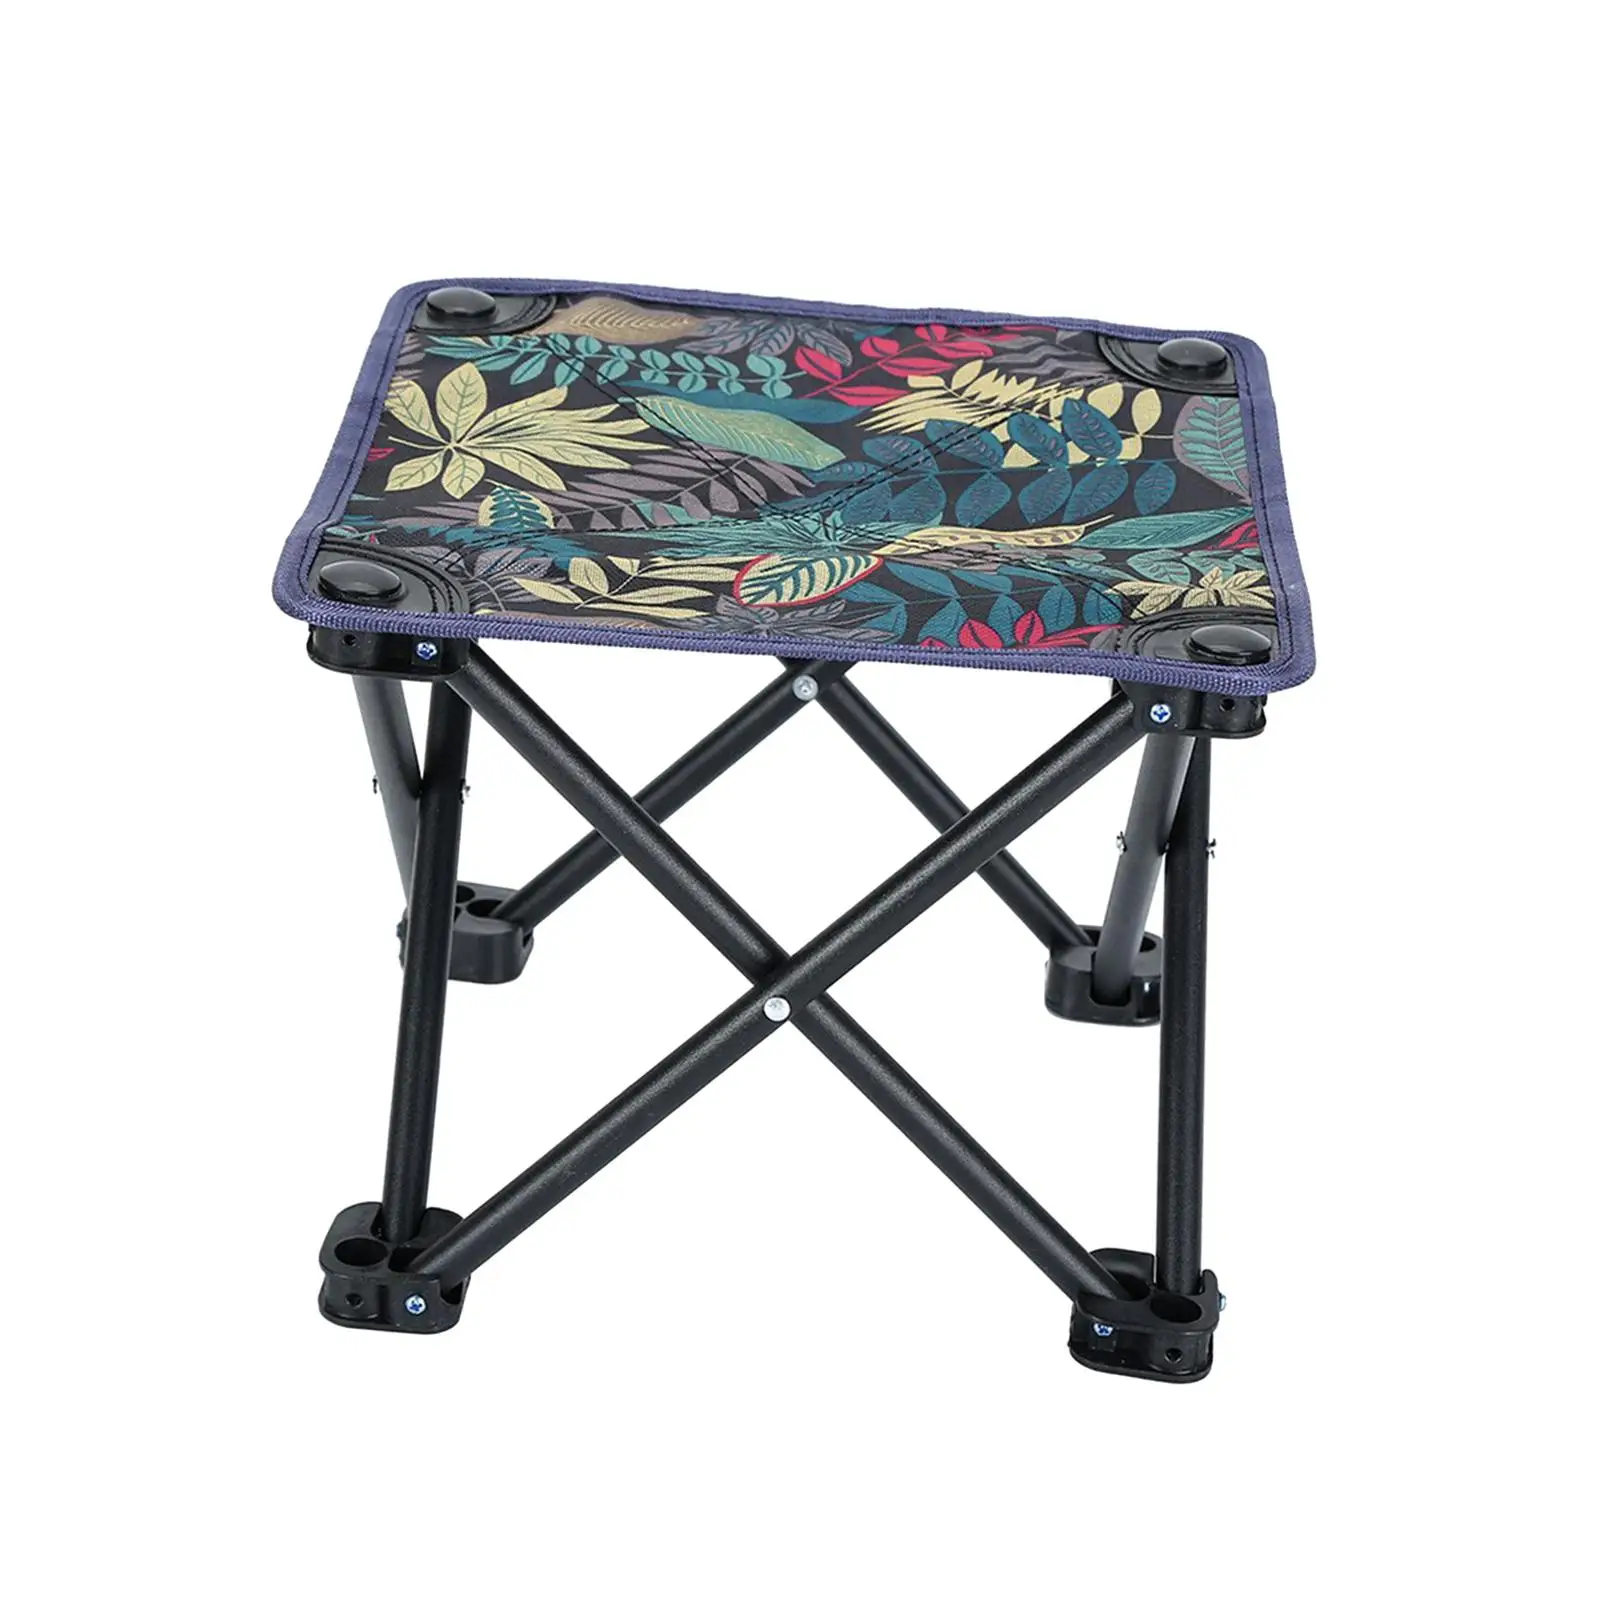 Camping Stool Heavy Duty Practical Reusable Lightweight Durable Foldable Folding Stool for BBQ Garden Traveling Fishing Backyard